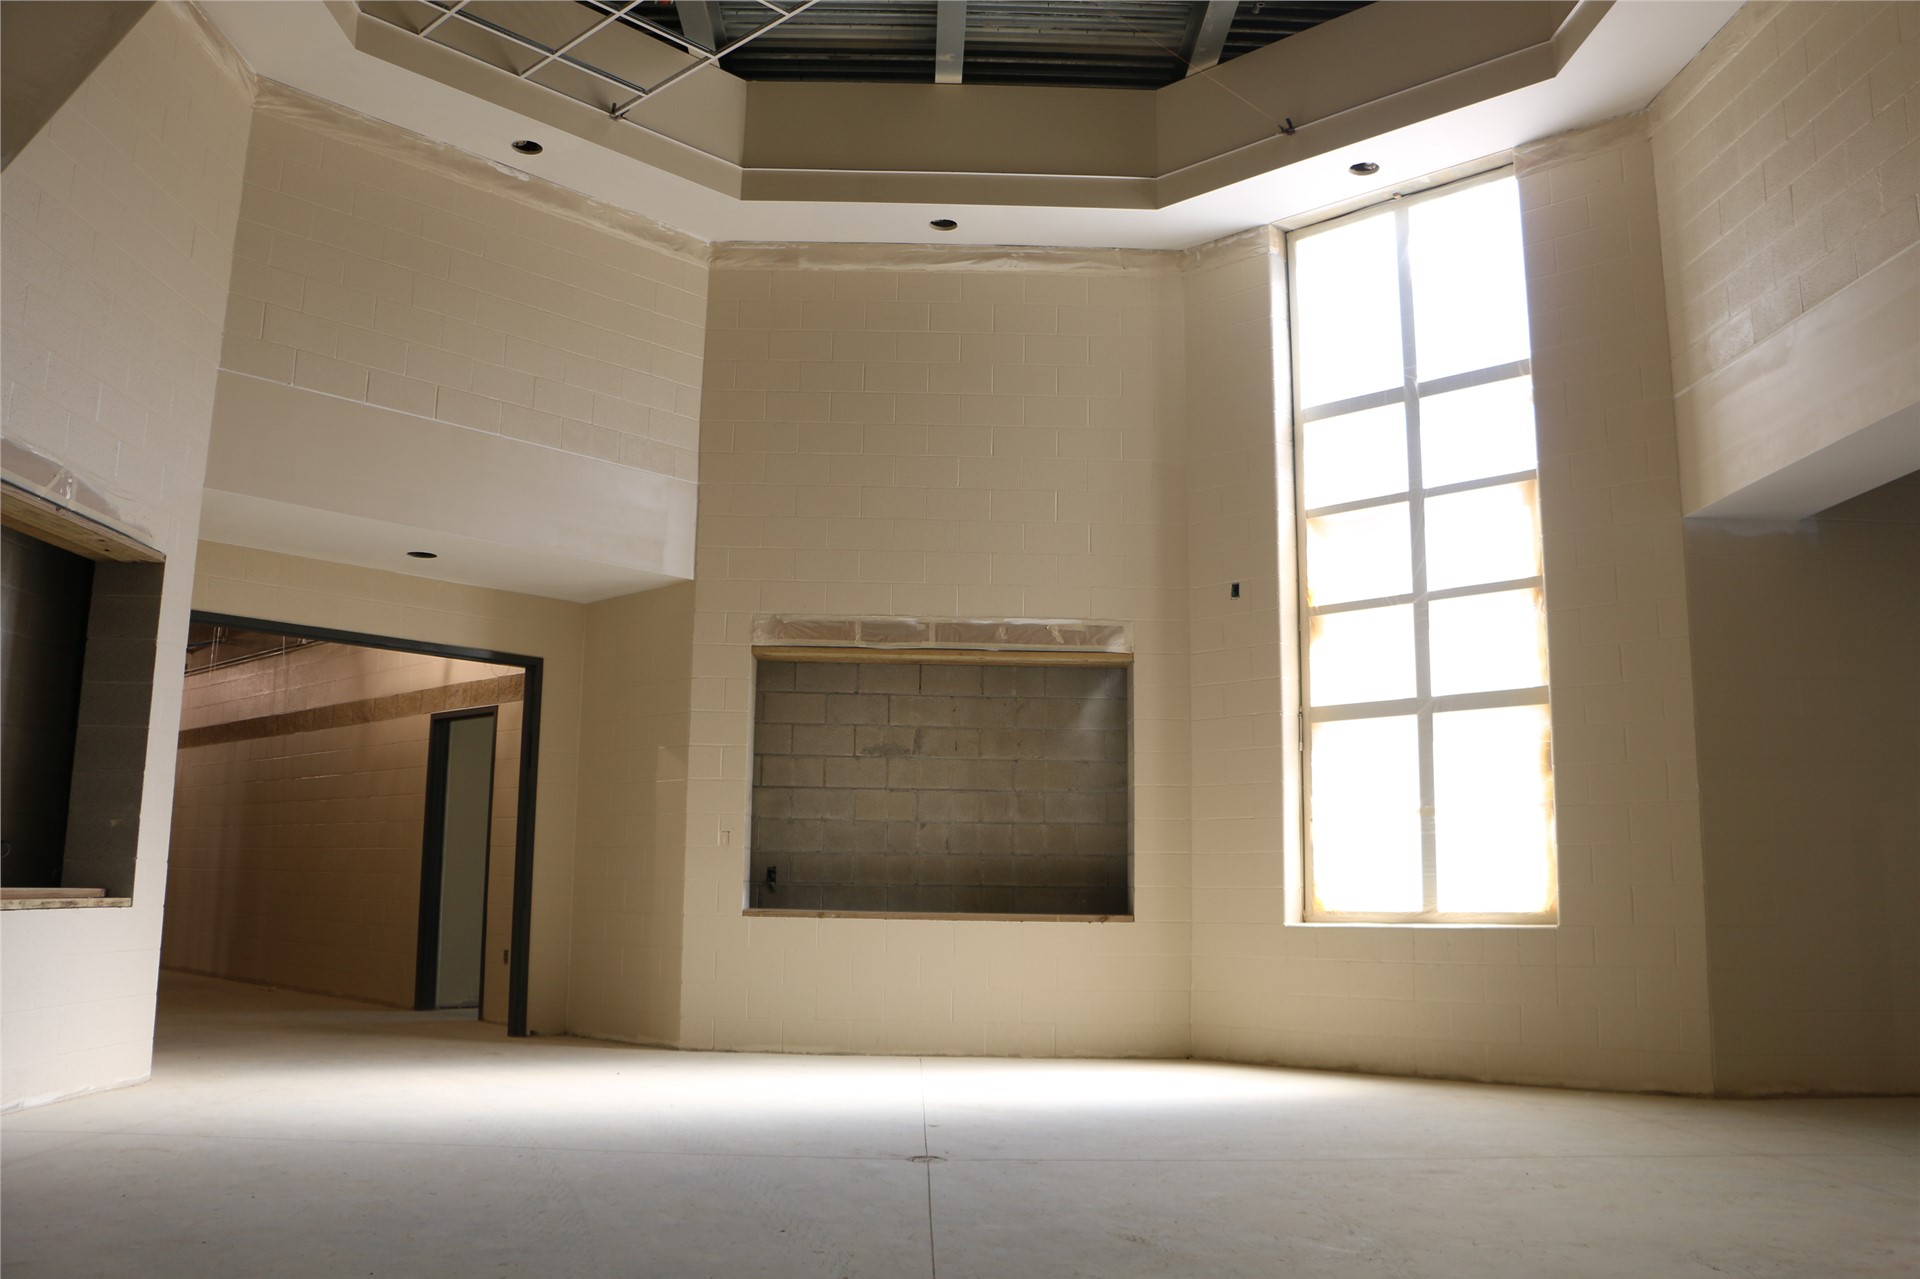 The rotunda connecting the Administrative Wing to the Athletic Wing (the hallway to the left goes towards the main office, academic classrooms, and the Arts Wing)